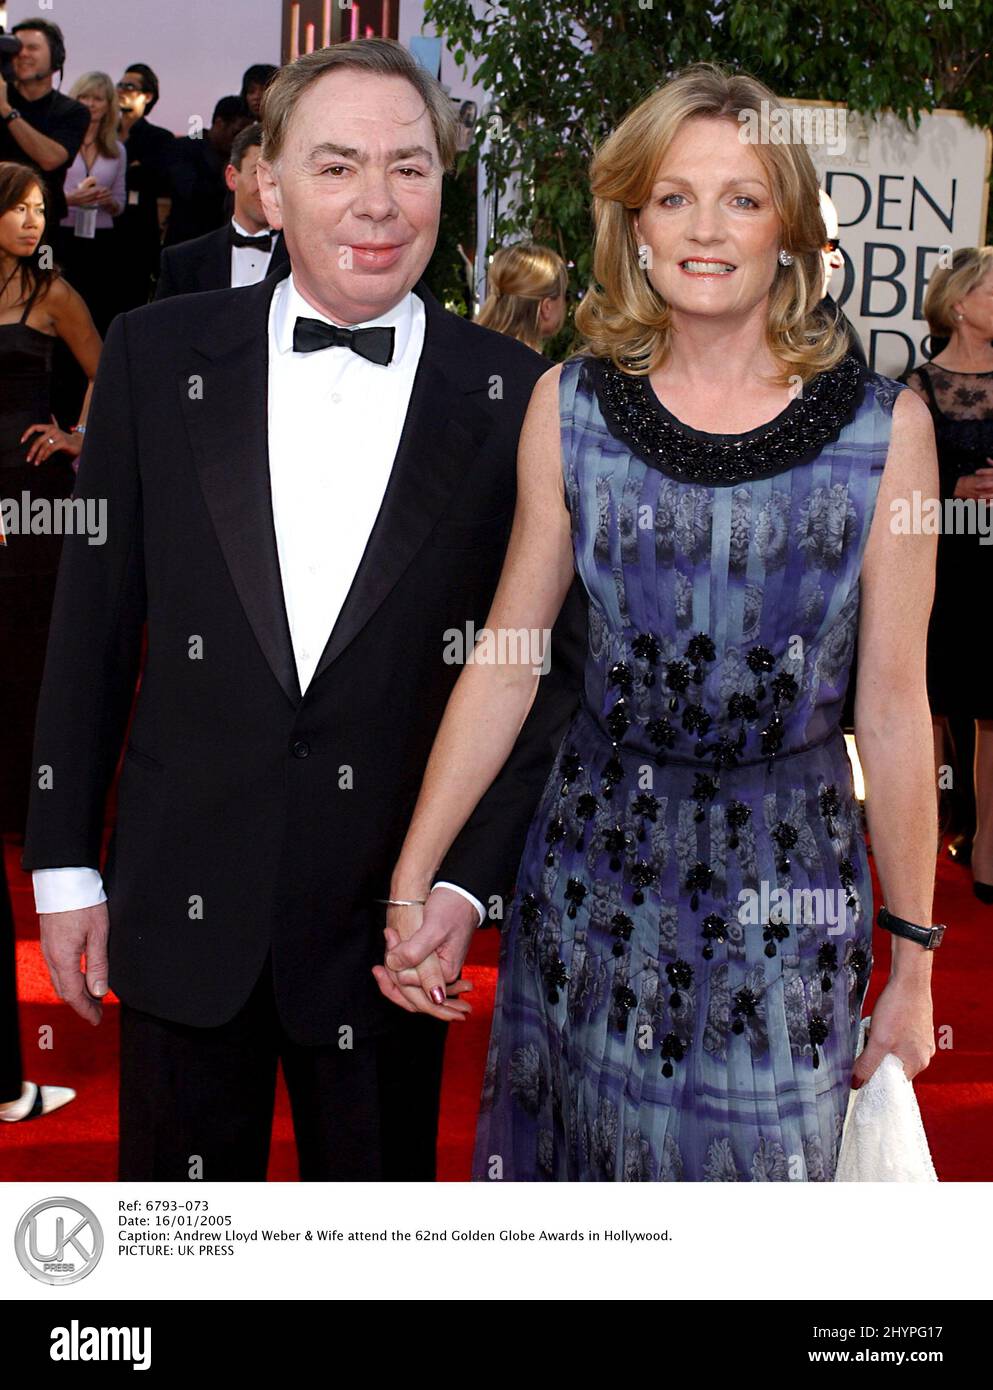 Andrew Lloyd Webber & Wife attend the 62nd Golden Globe Awards in Hollywood. Picture: UK Press Stock Photo